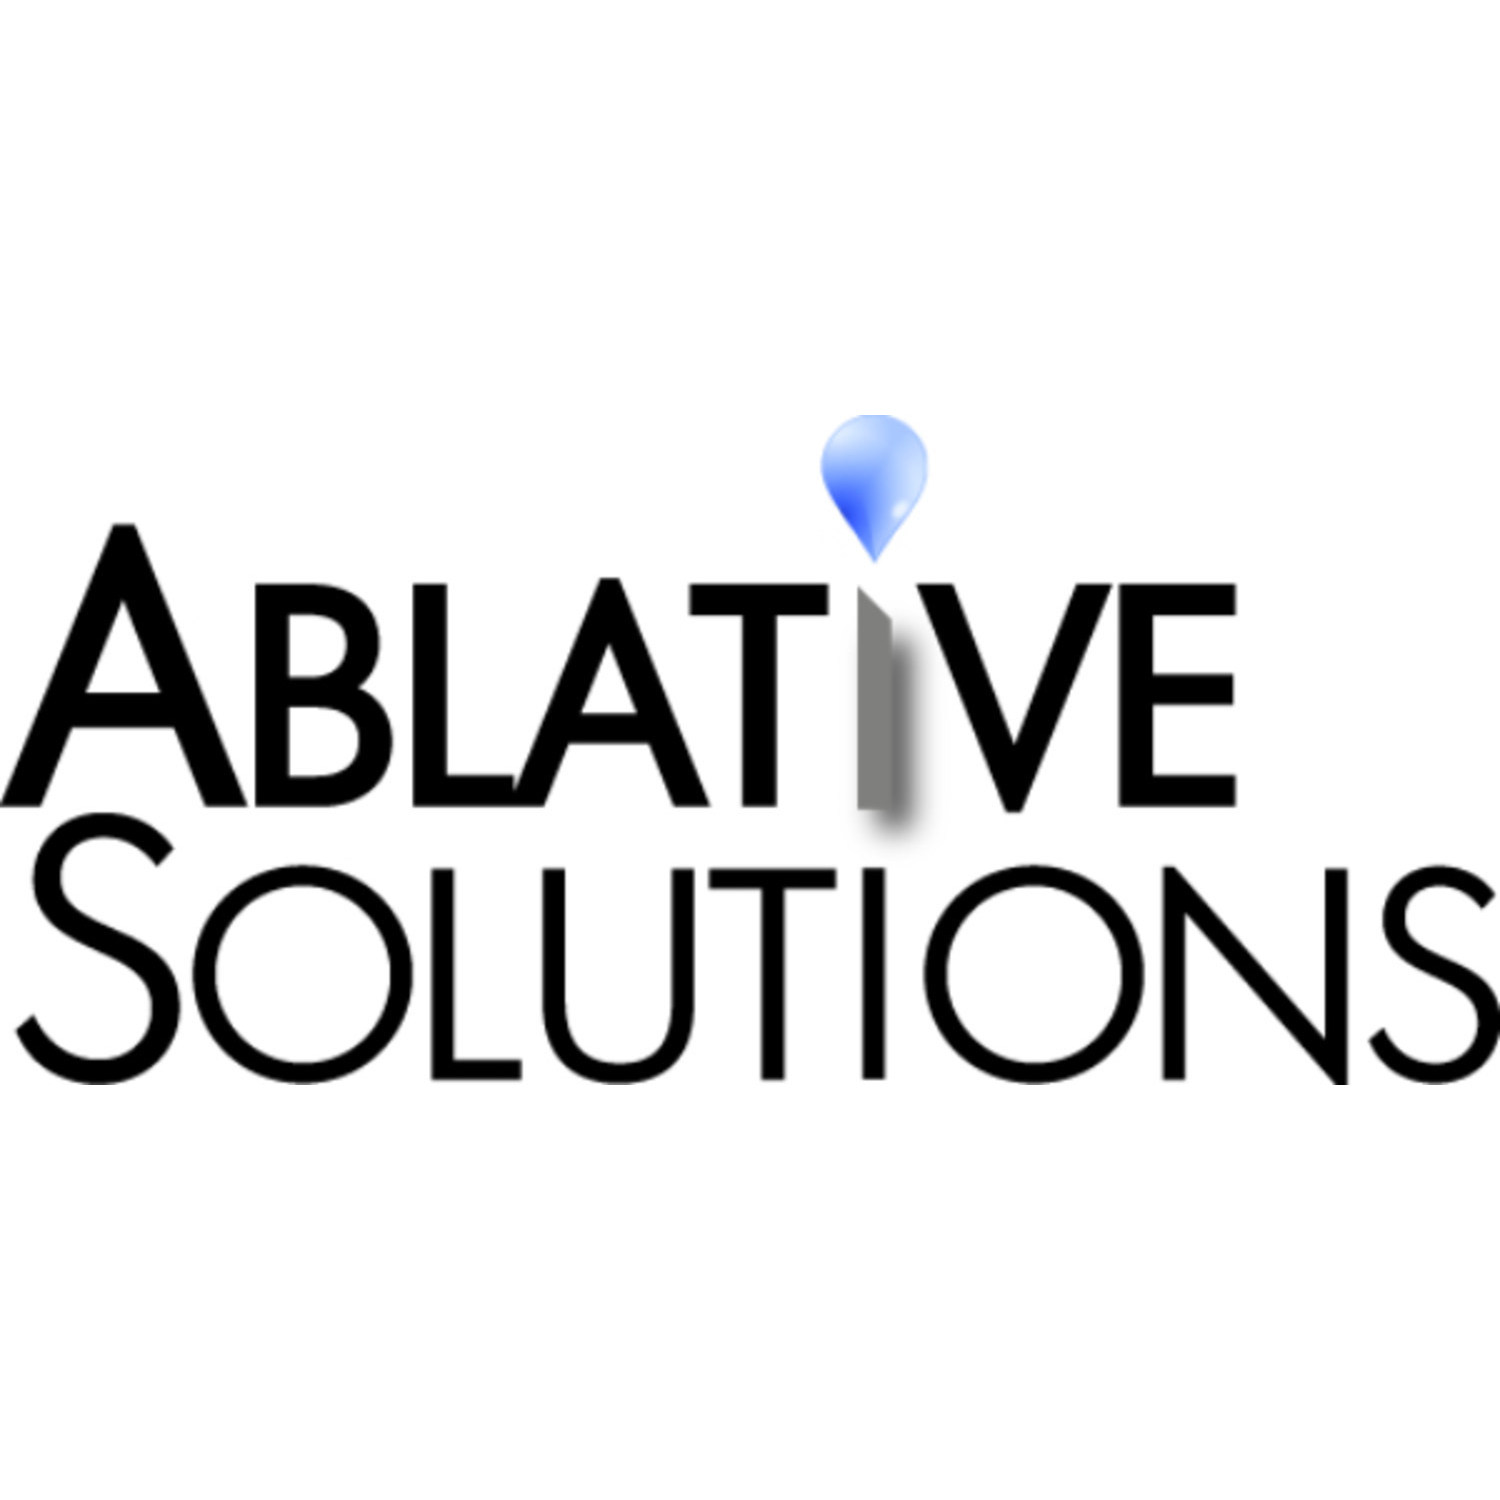 Ablative Solutions IPO